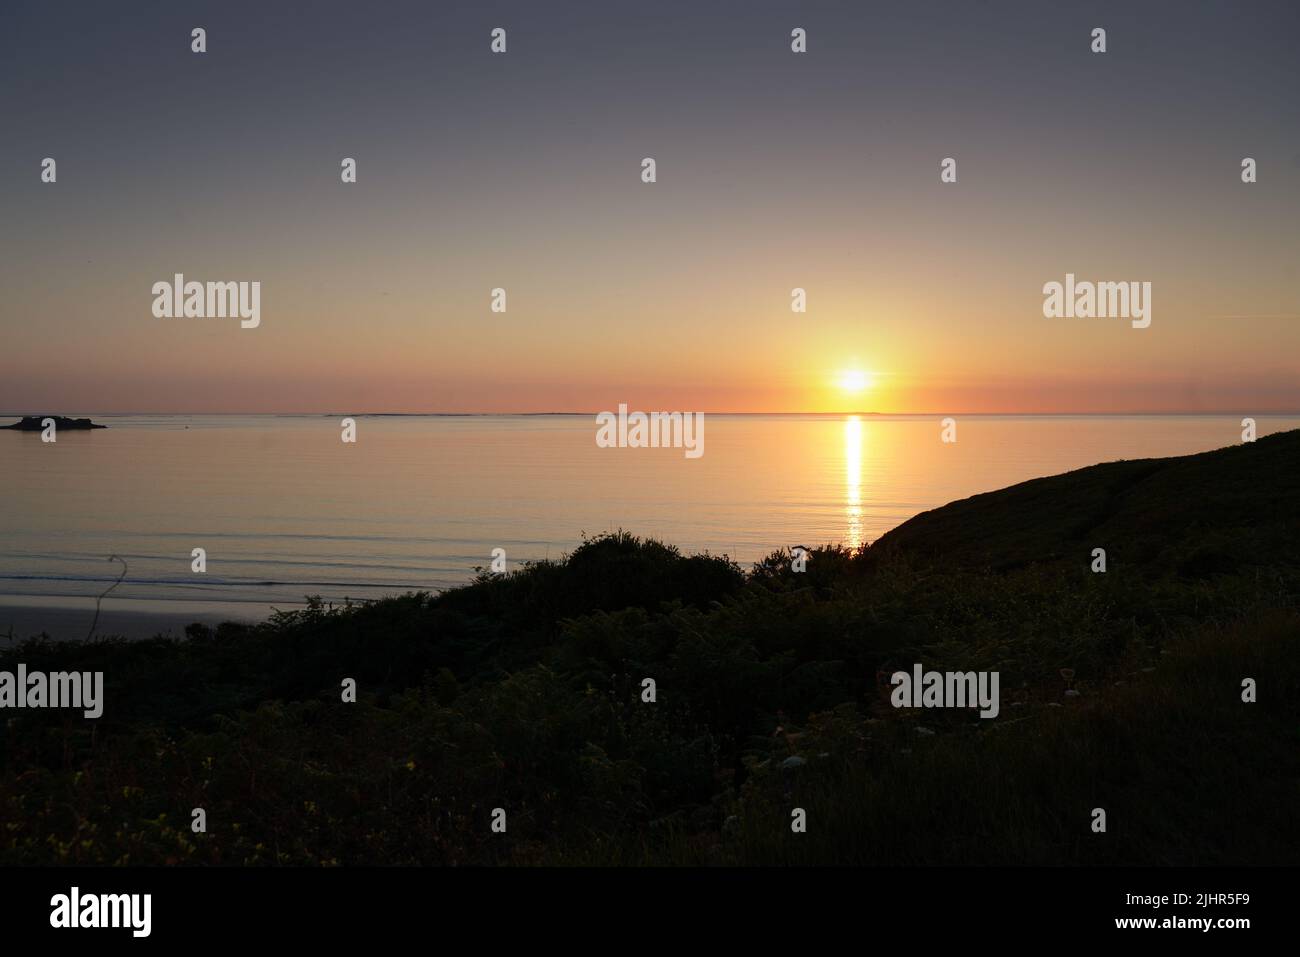 France, Bretagne region (Brittany), North tip of Finistère, pays d'Iroise, Ploumoguer, beach of Illlien, sunset, view over the Île d'Ouessant, Stock Photo